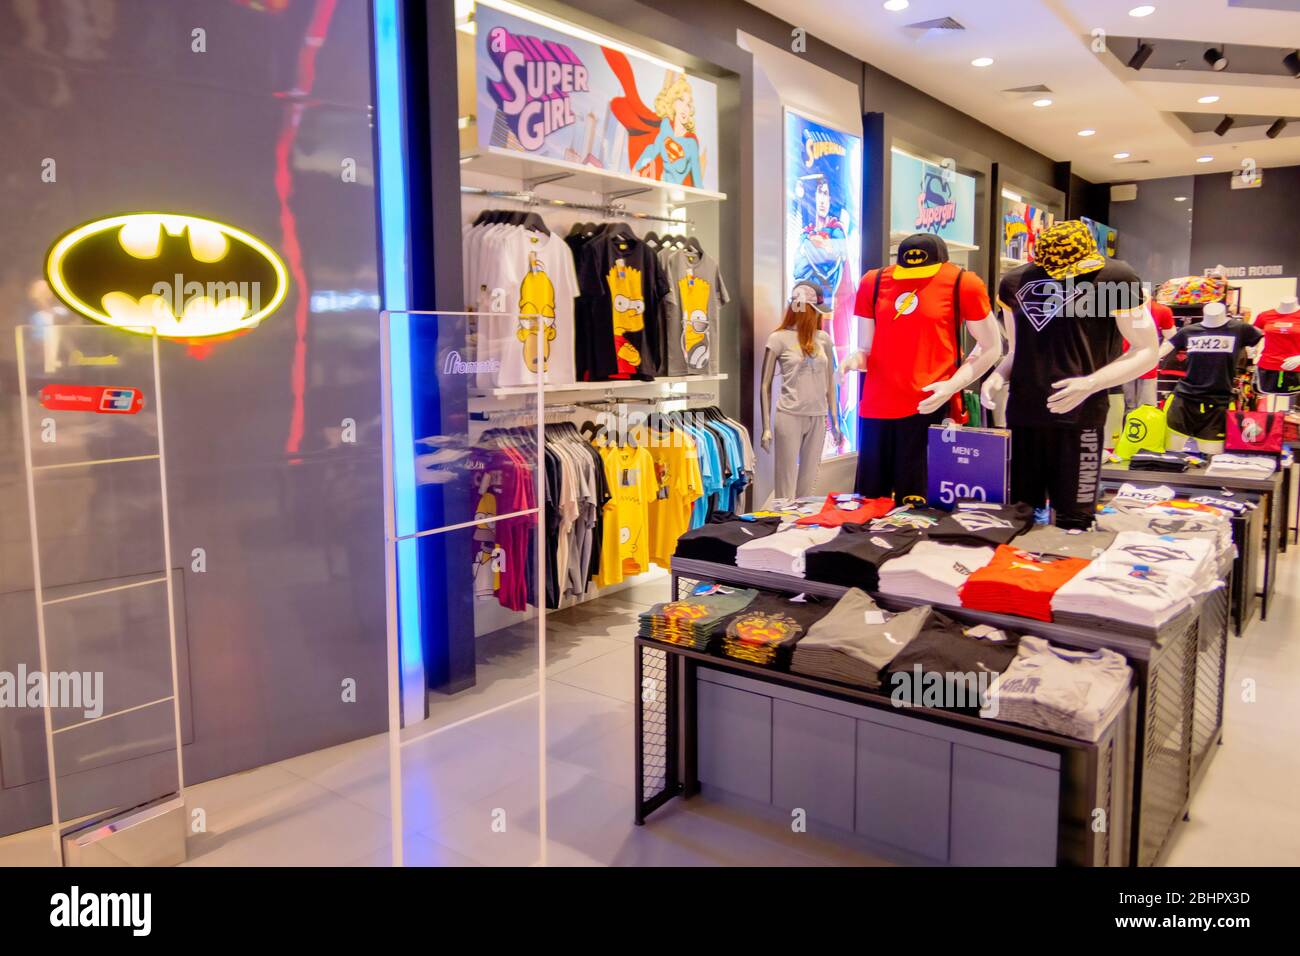 Many styles of DC clothing store with yellow batman emblem at the front of store in Blueport department store Hua Hin, Thailand MArch 20, 2019 Stock Photo